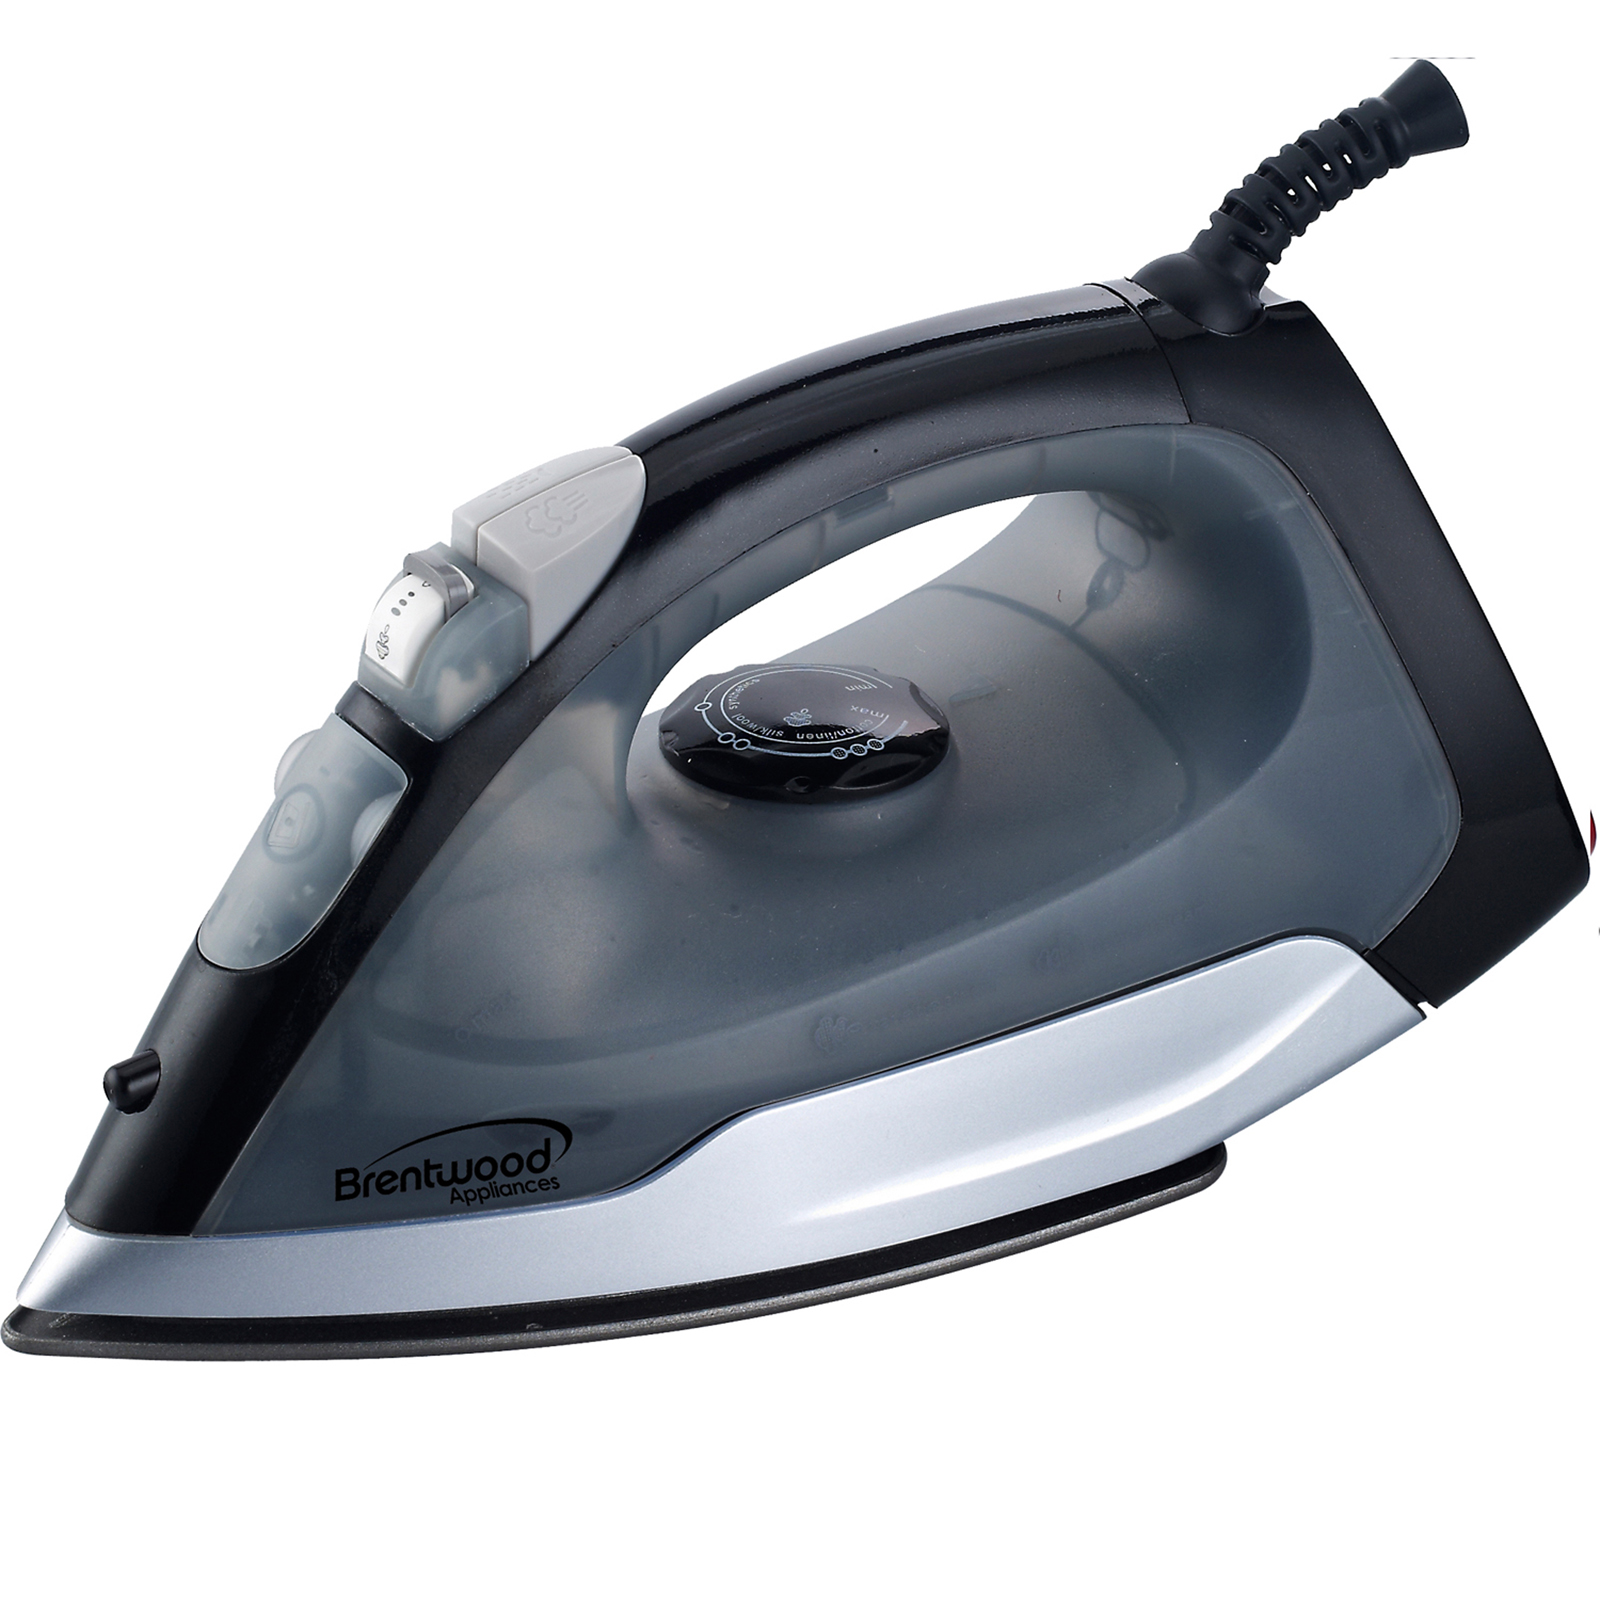 Brentwood 97083302M Full Size Steam/Spray/Dry Iron